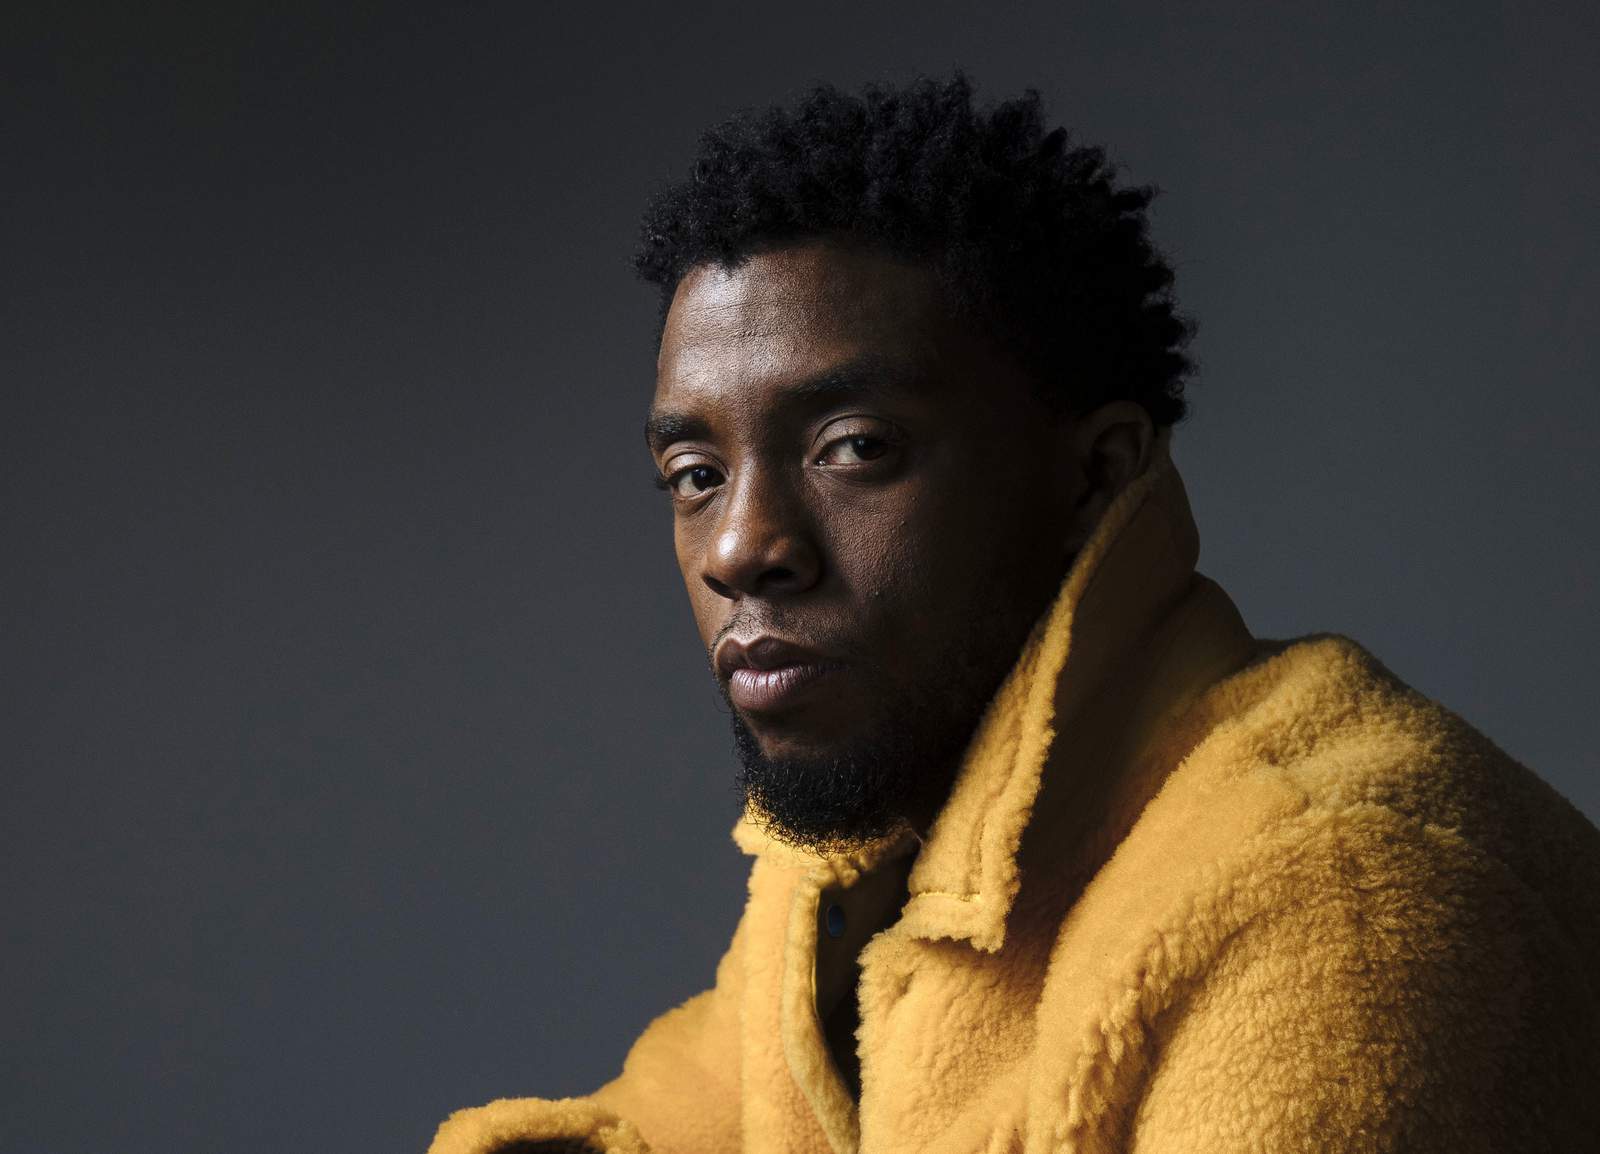 Chadwick Boseman didn't just play icons. He was one.